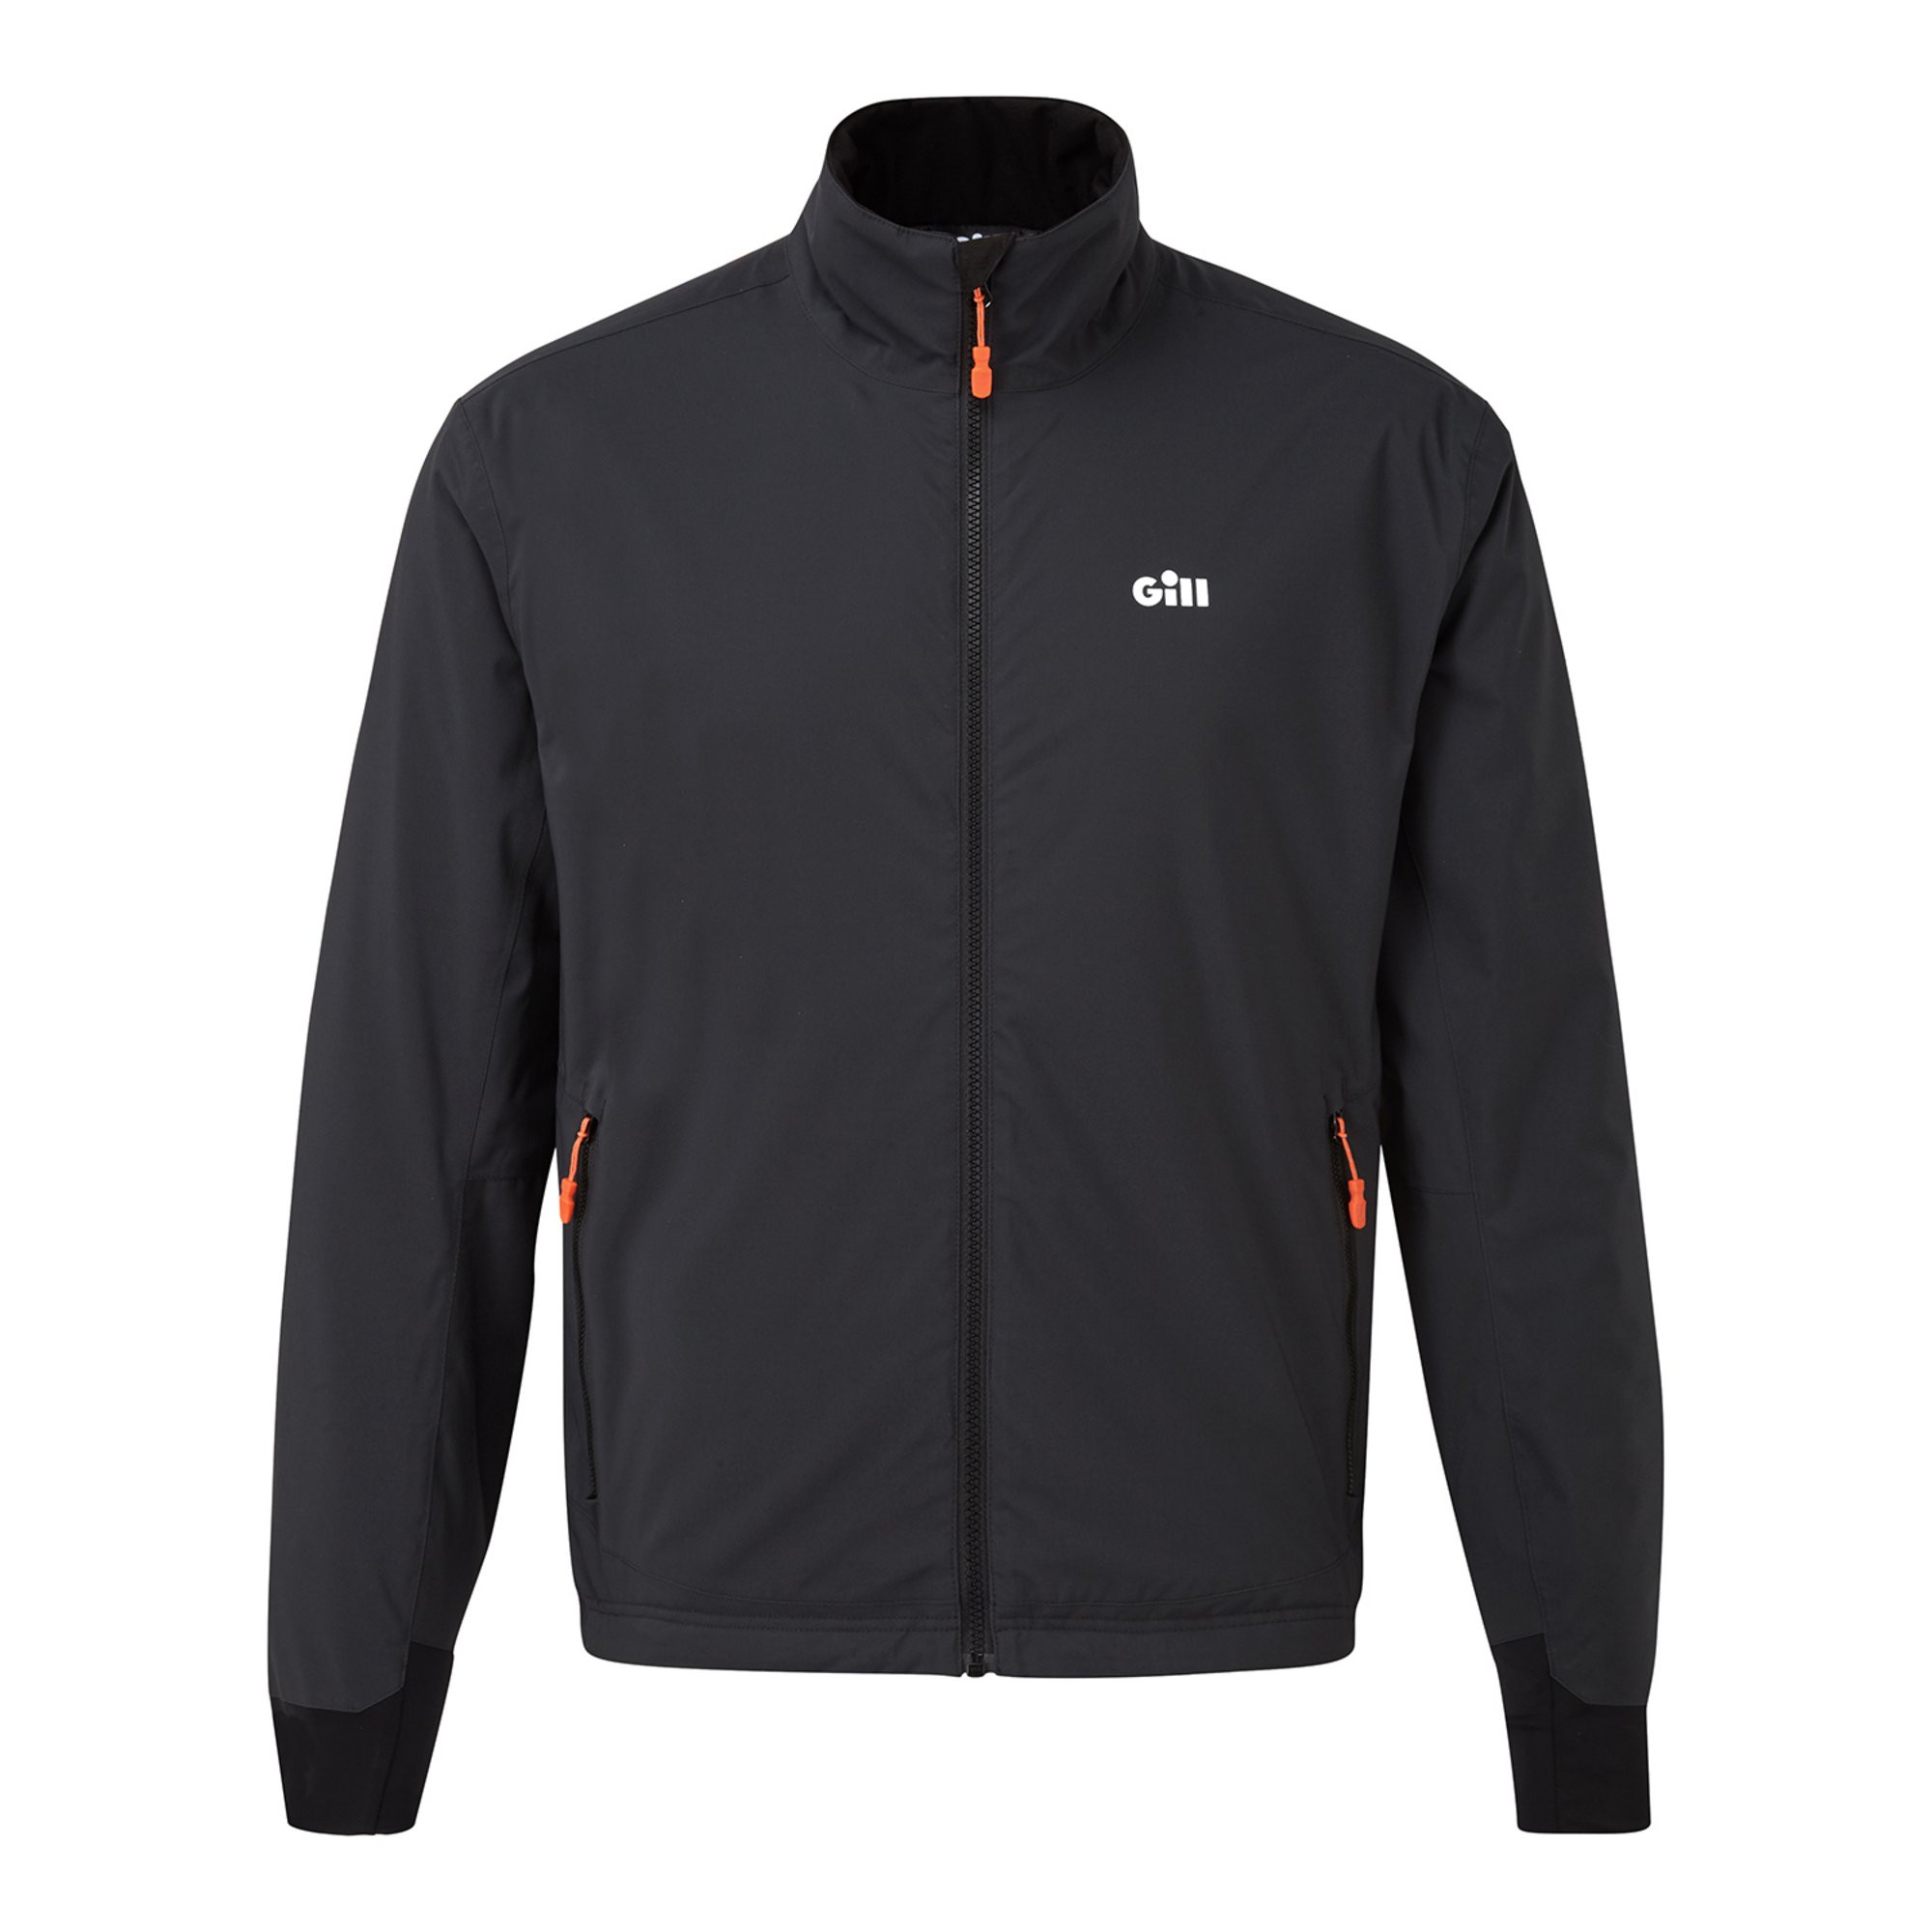 OS INSULATED JACKET GRAPHITE,L